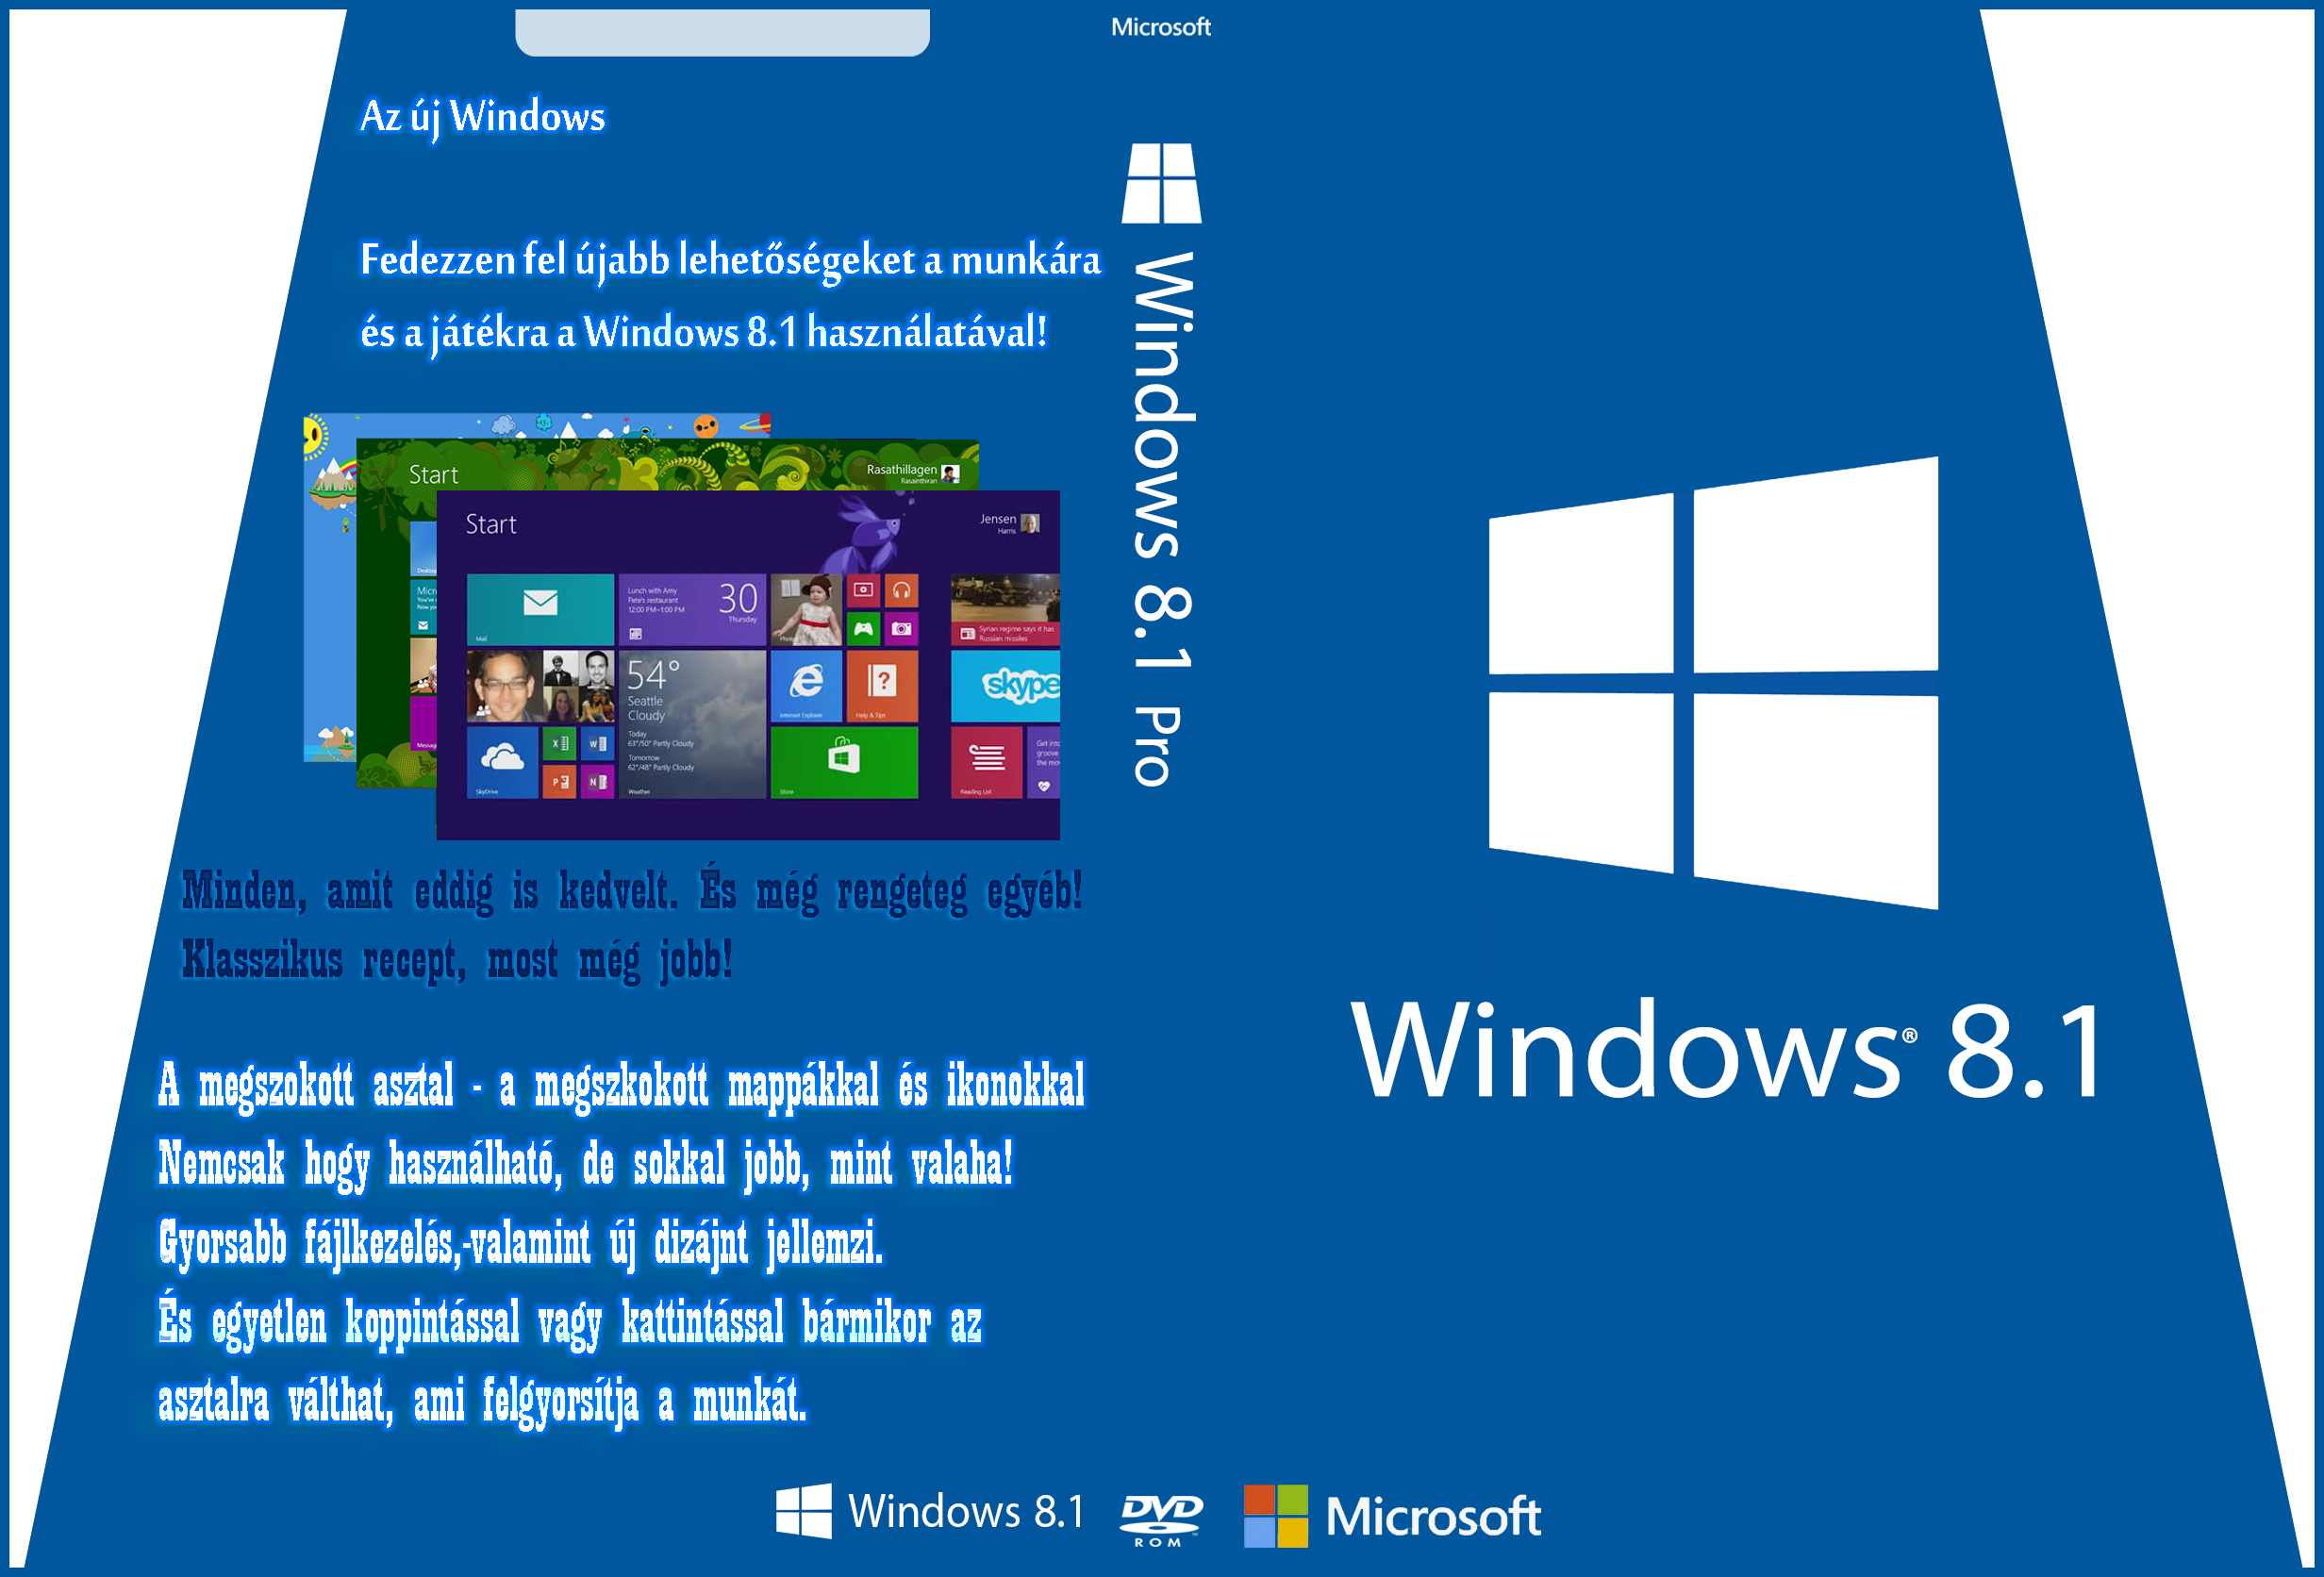 cover_windows_8_1_pro_pt_br_by_gustavovs-d6r5s2a.PNG